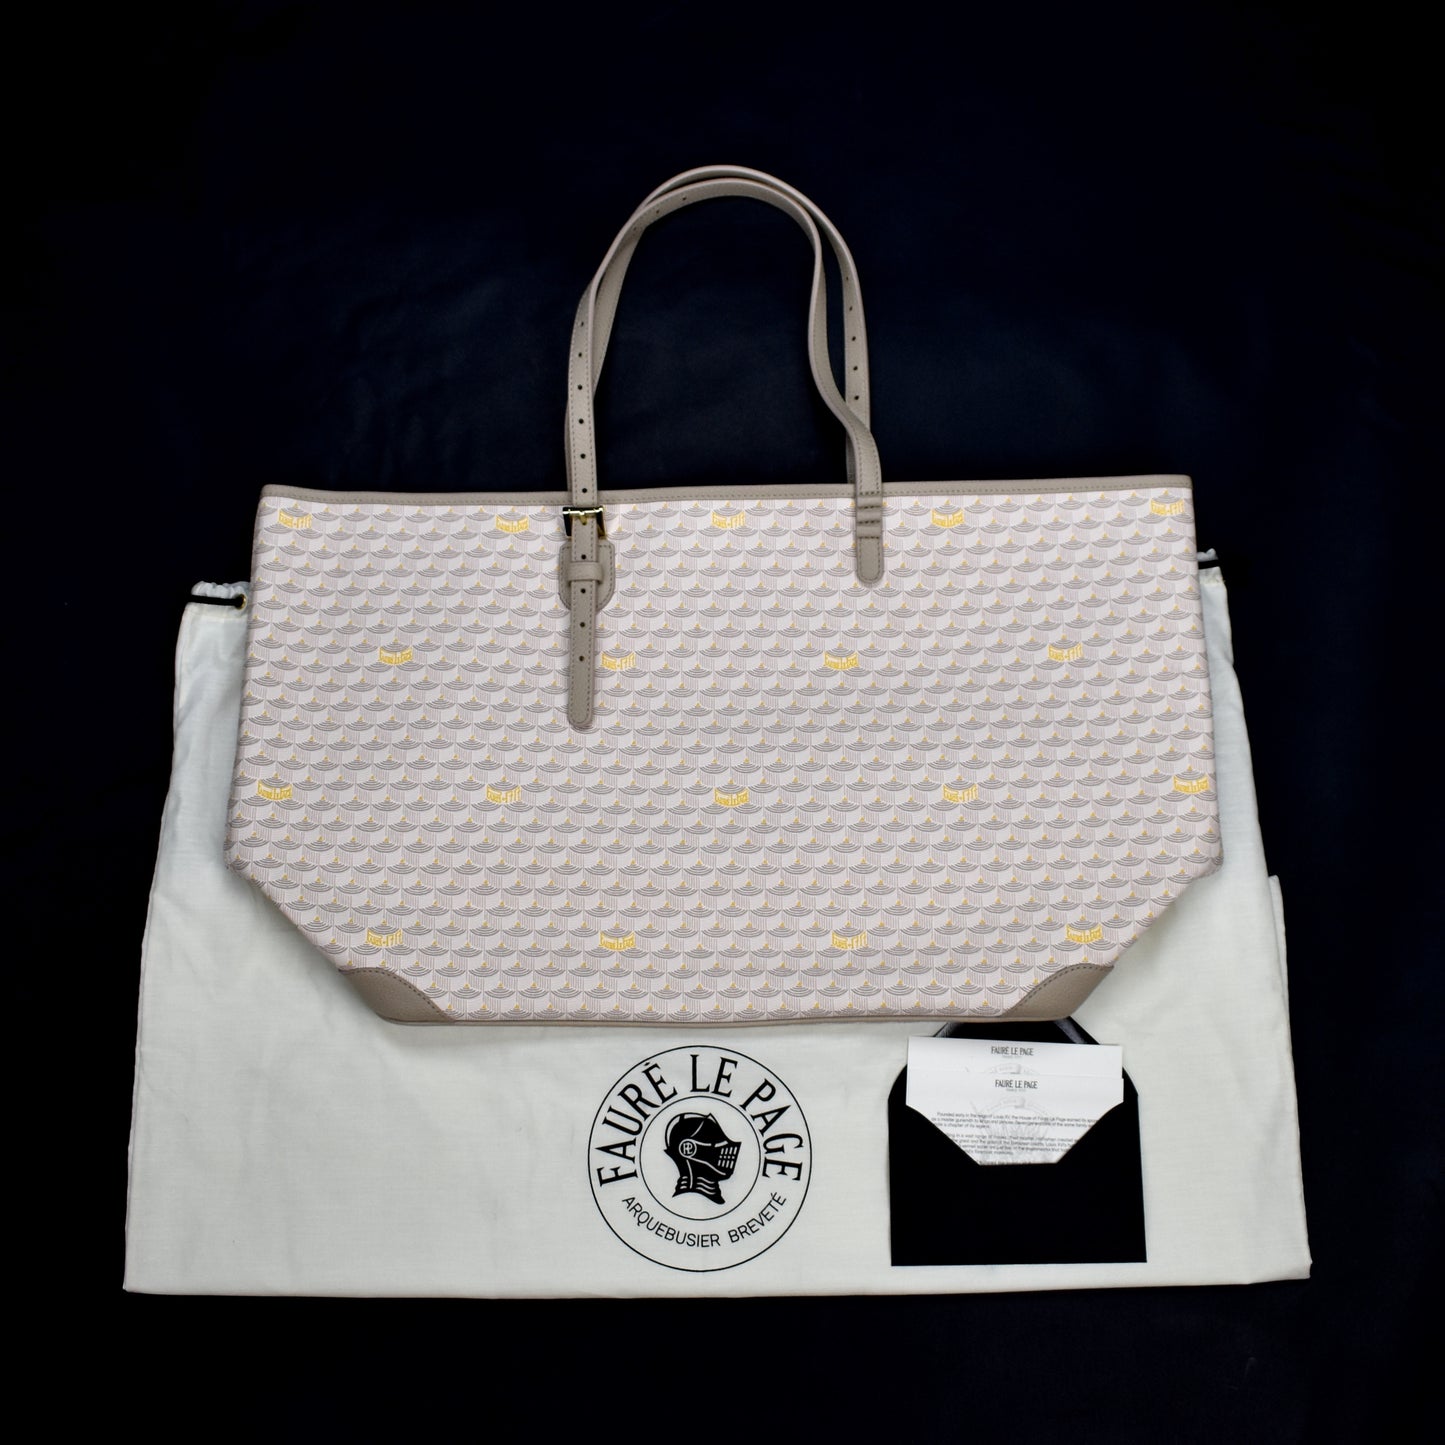 Faure le page: Daily Battle tote review 